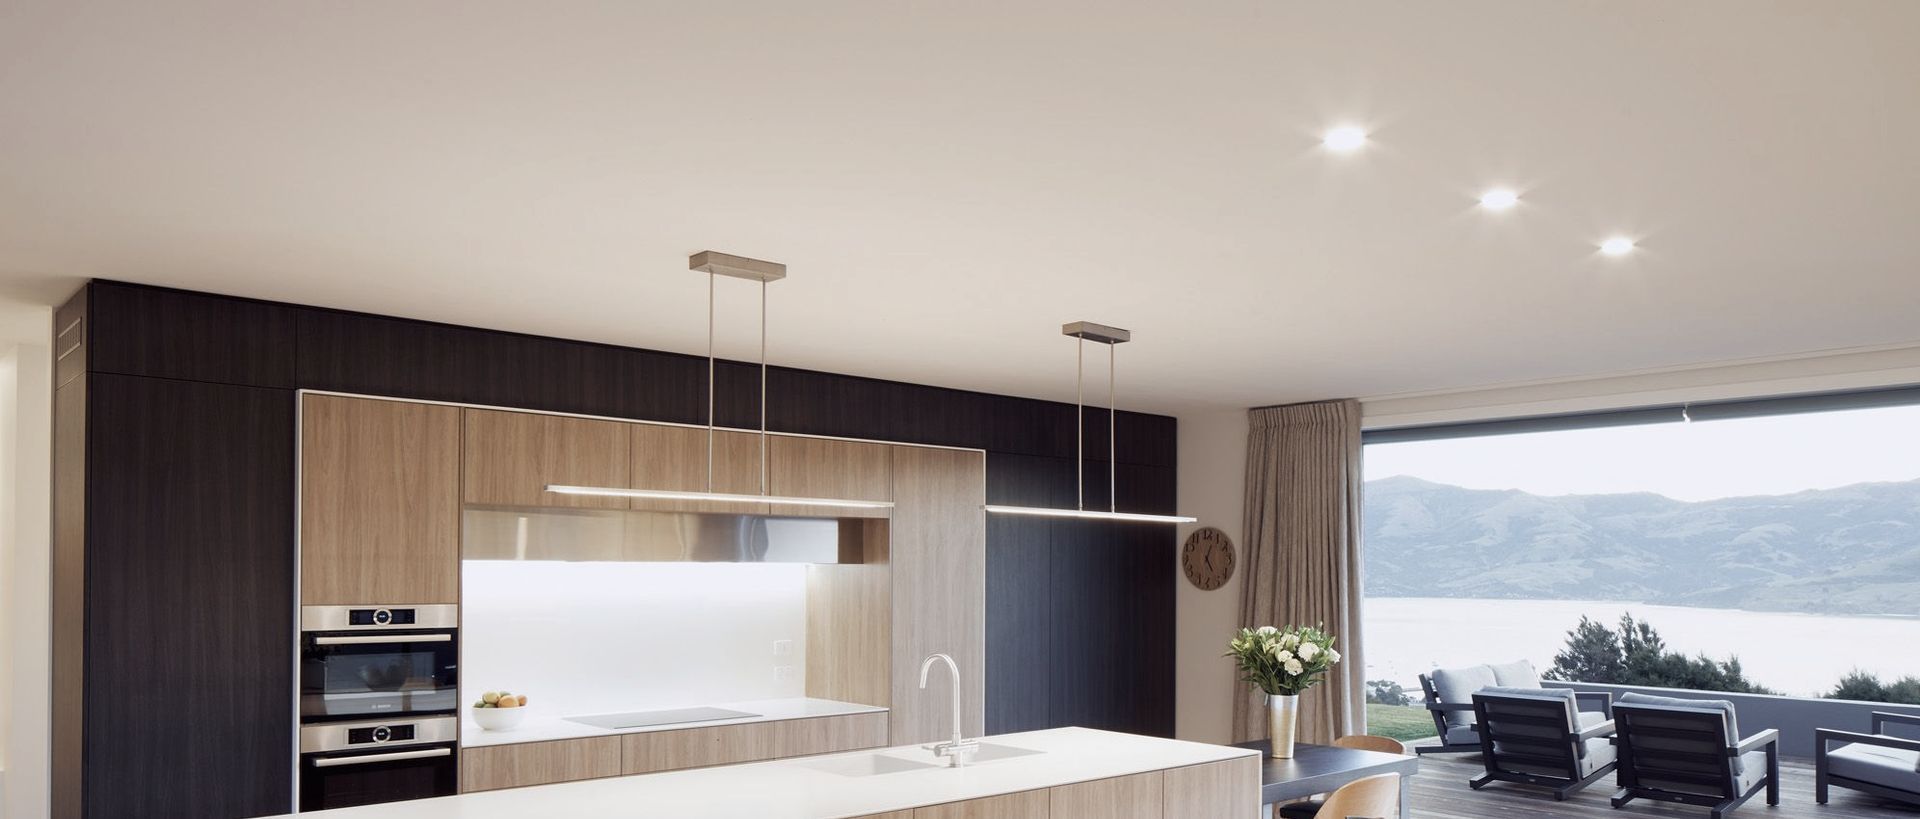 Modern Age Kitchens and Joinery Banner image